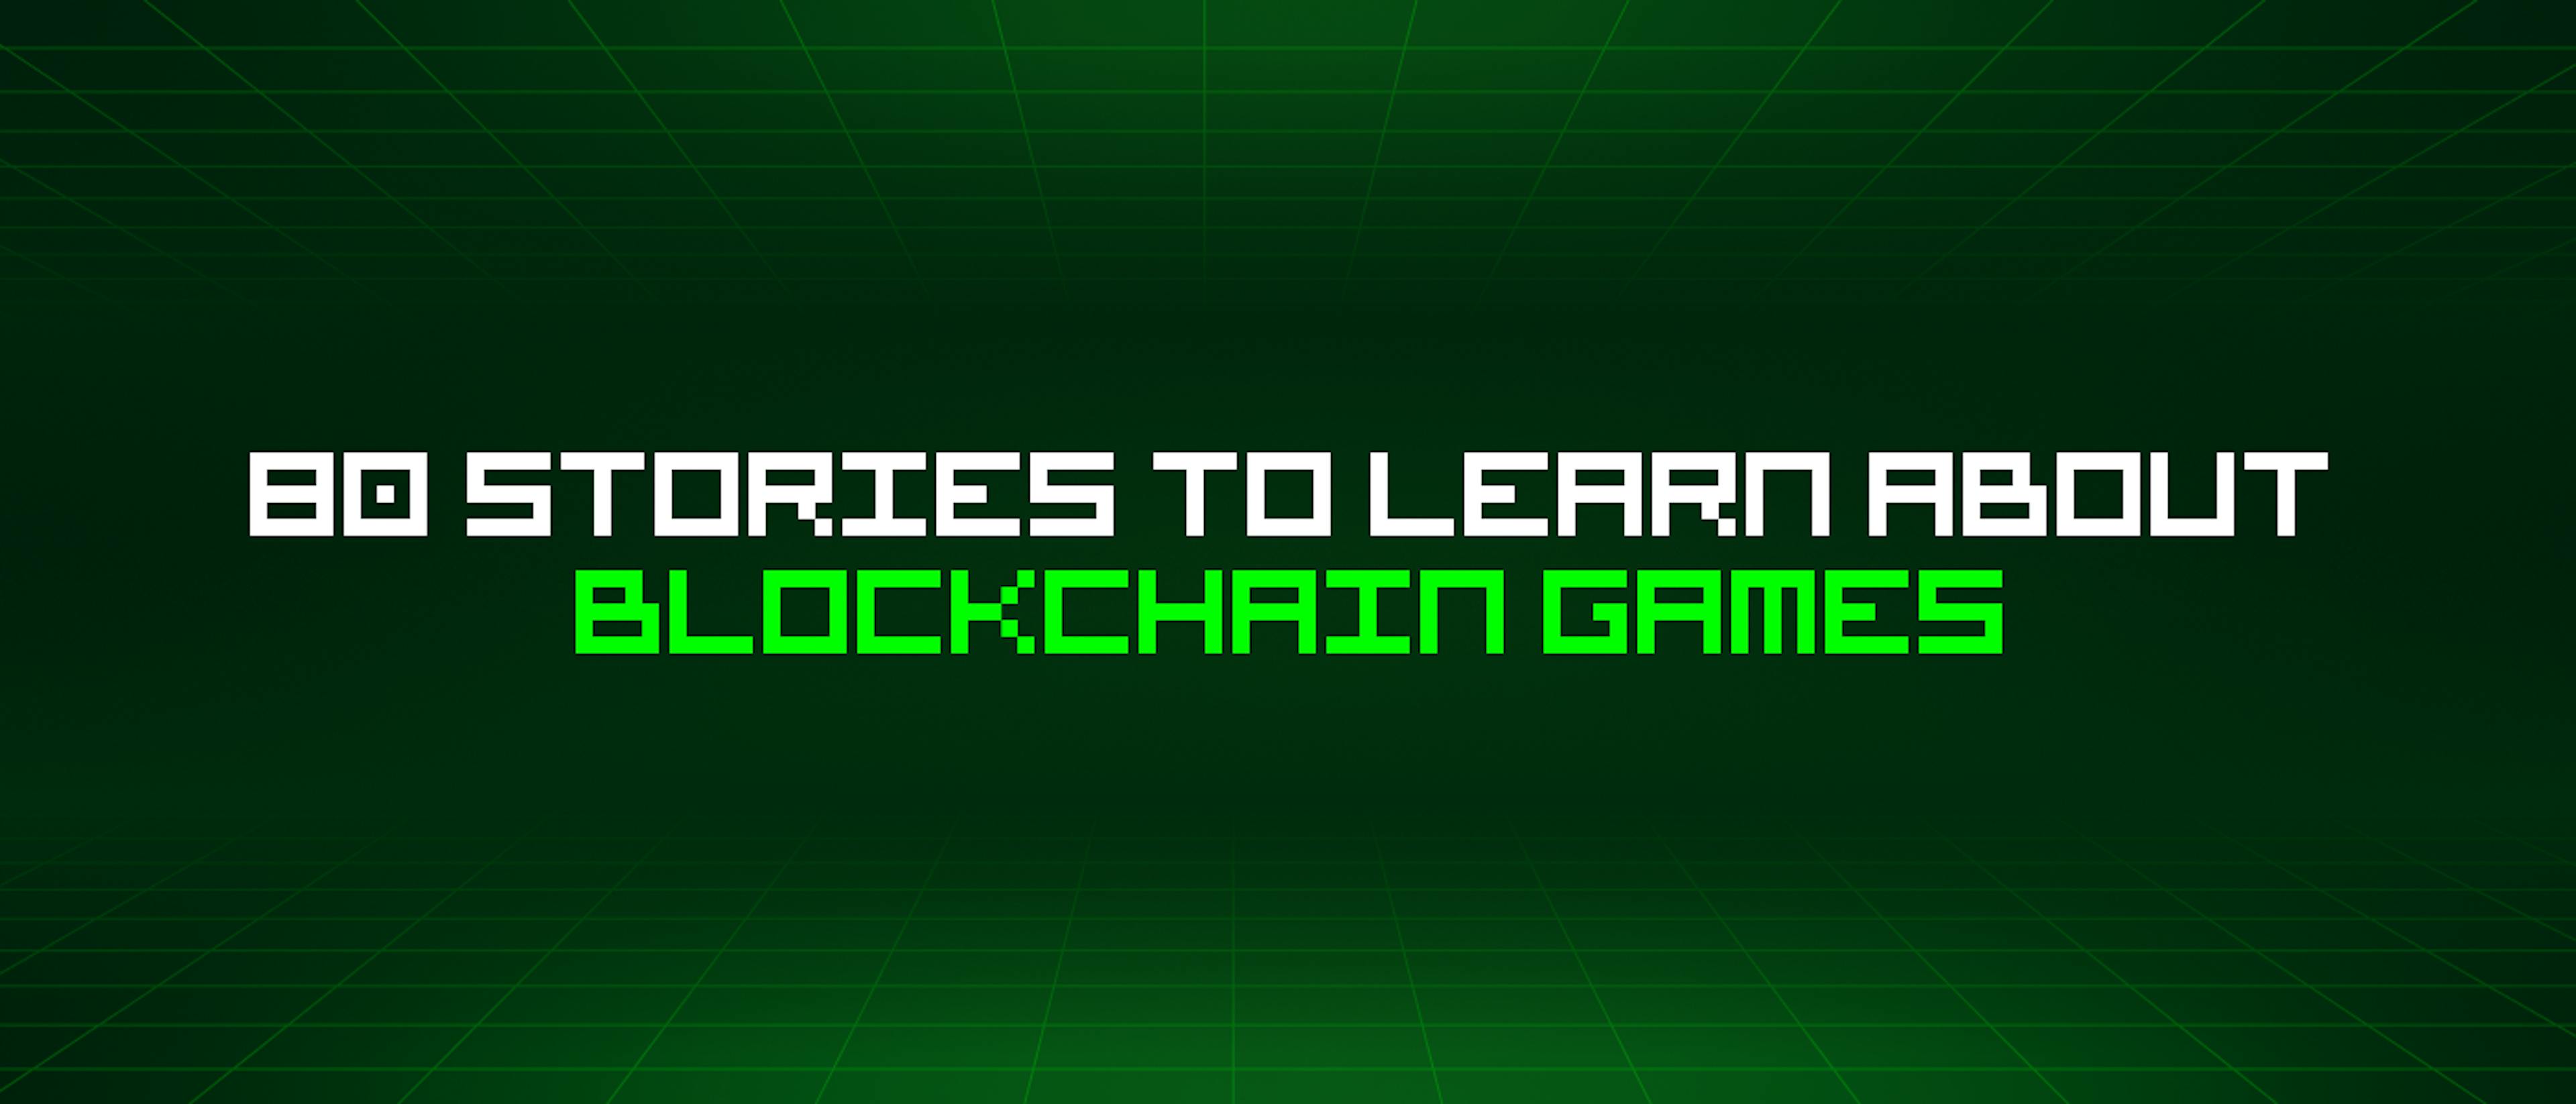 featured image - 80 Stories To Learn About Blockchain Games